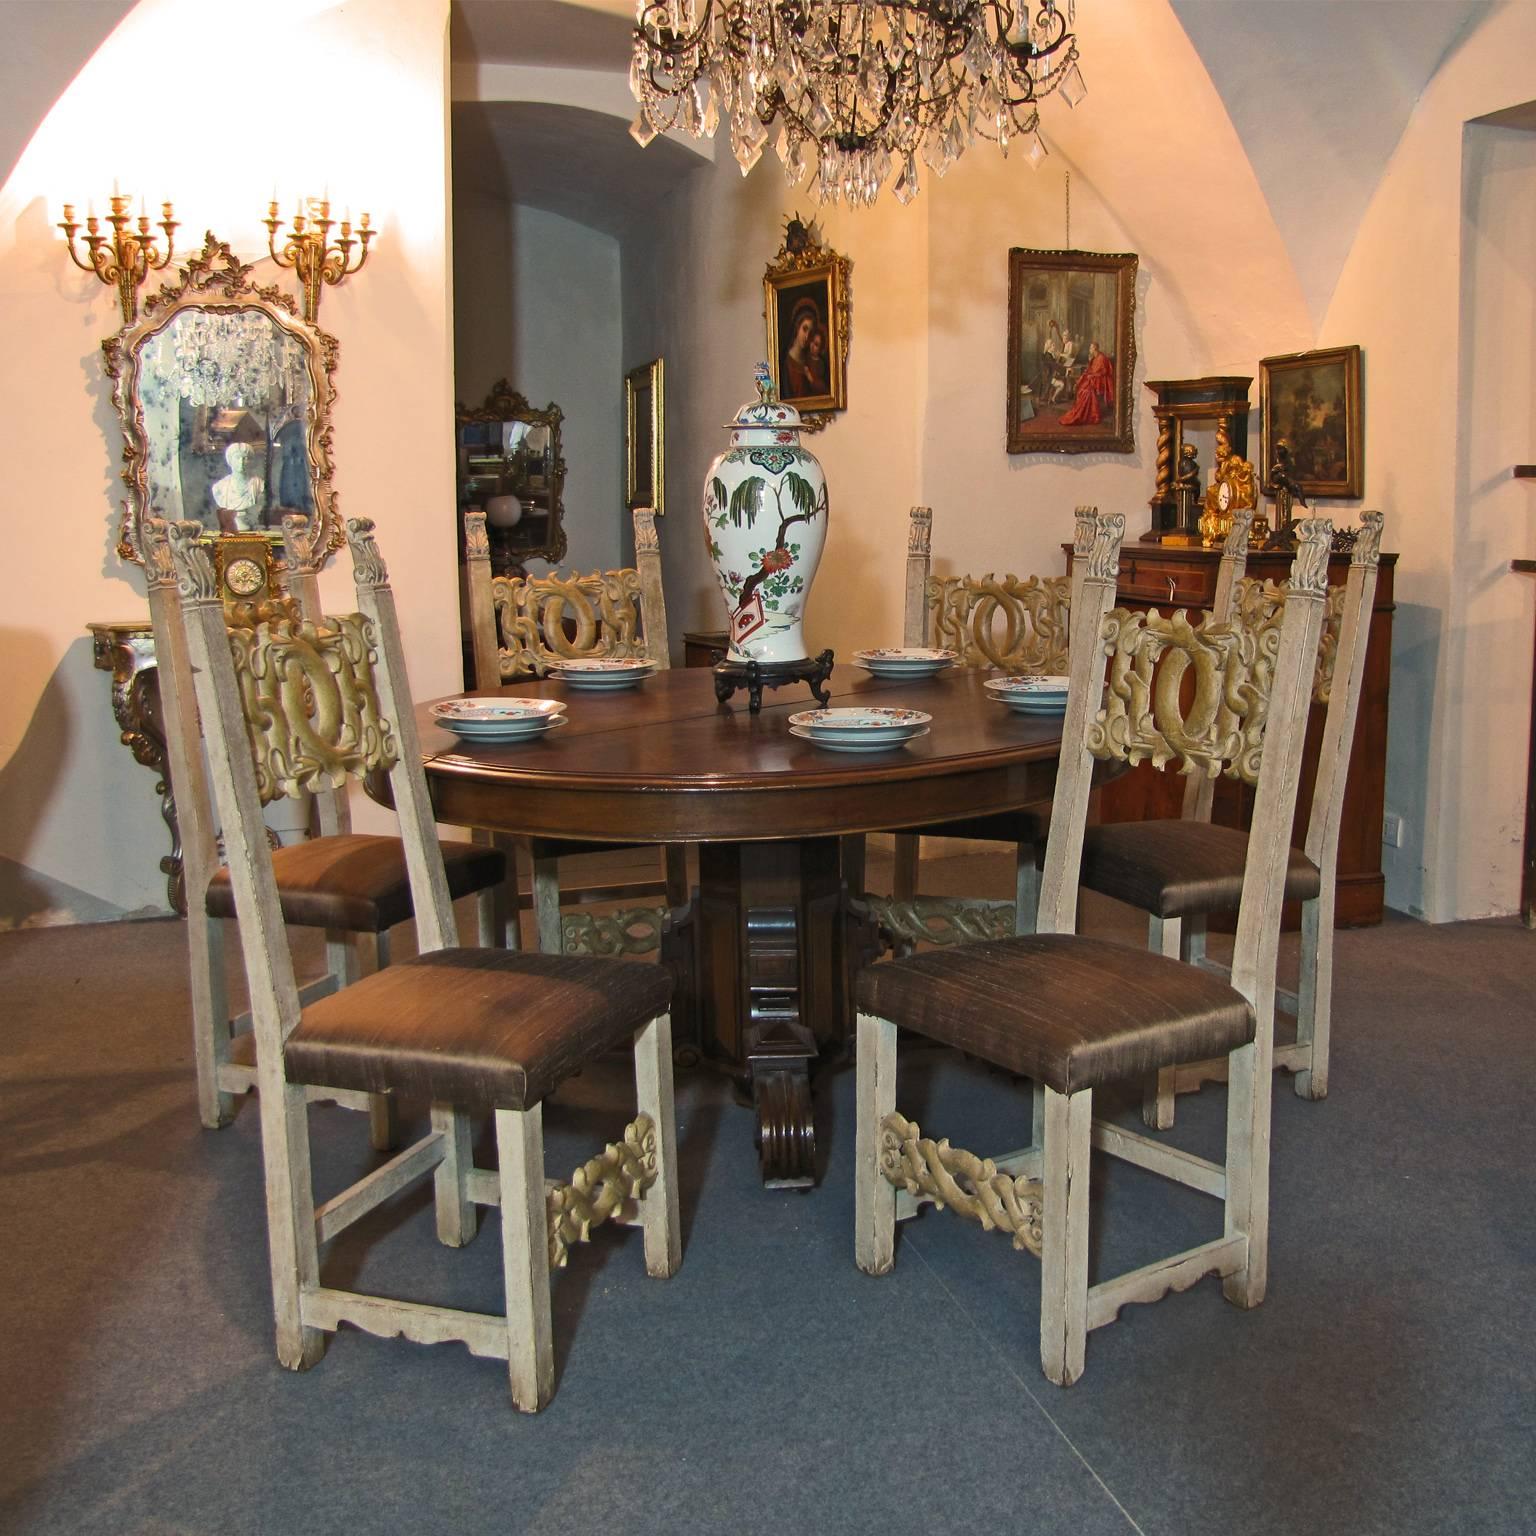 Set of Six 17th Century Italian Carved and Painted Solid Walnut Wood Chairs 4